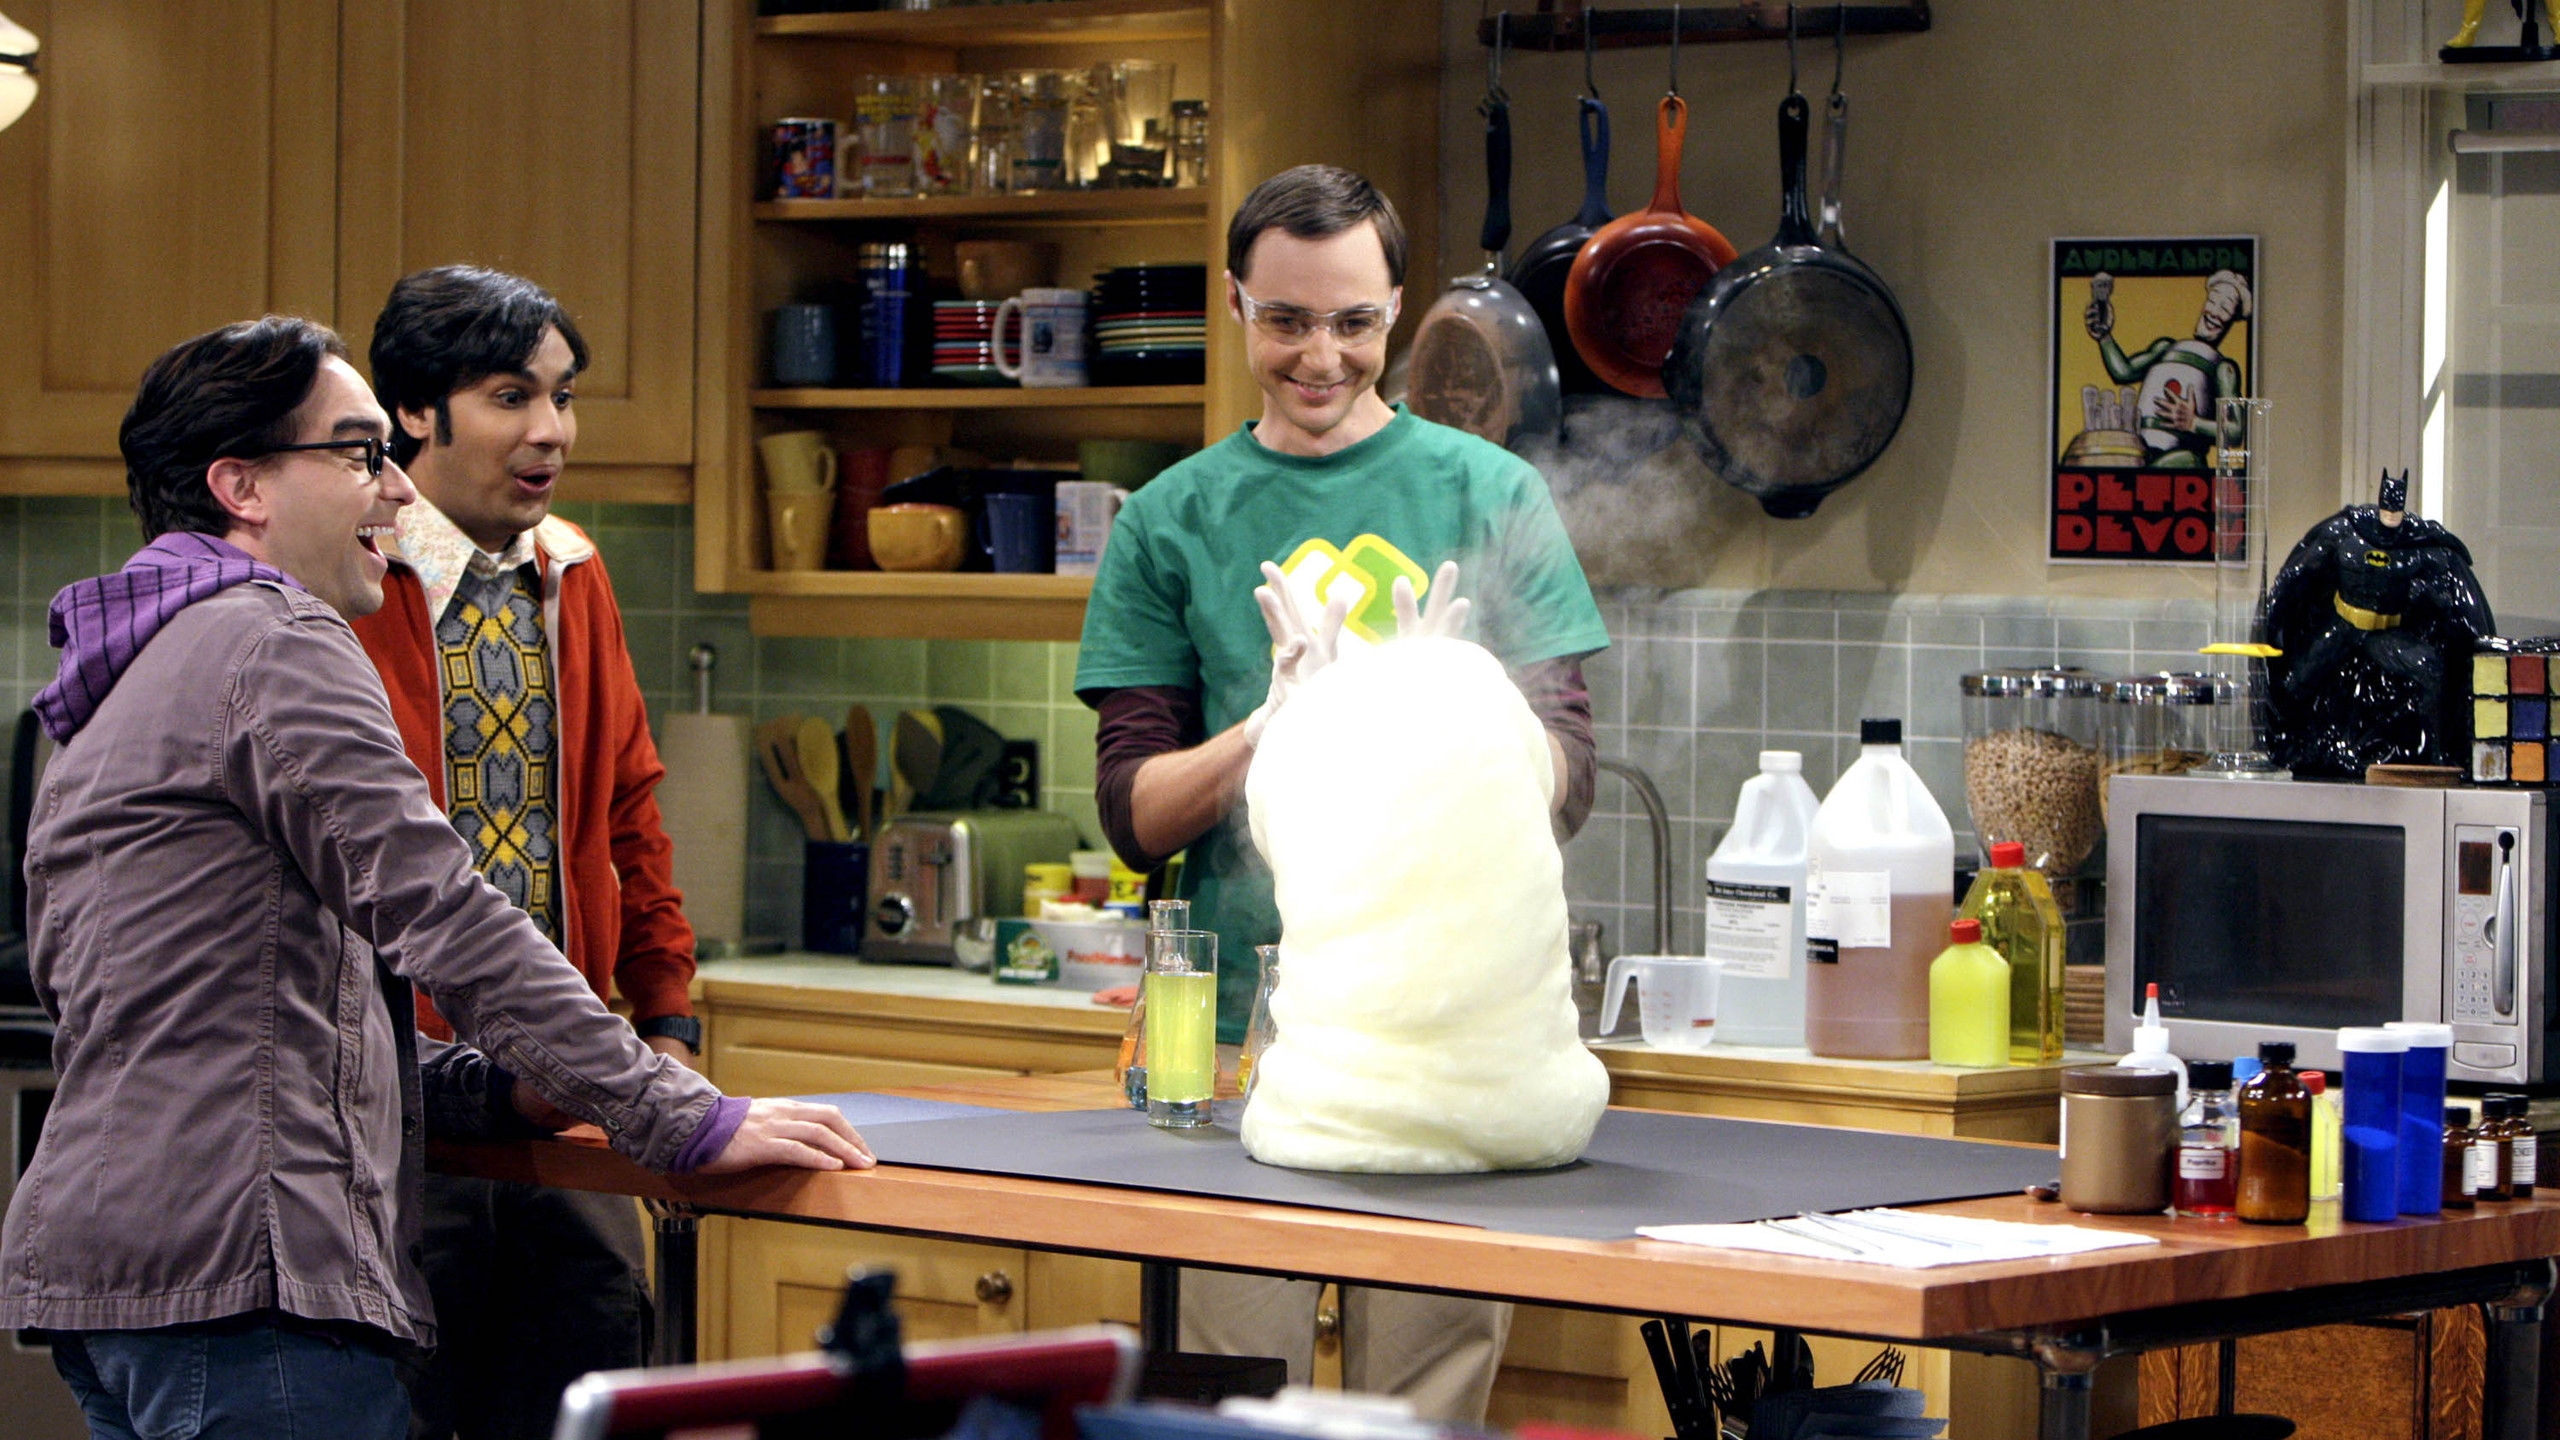 The Big Bang Theory Experiment for 2560x1440 HDTV resolution